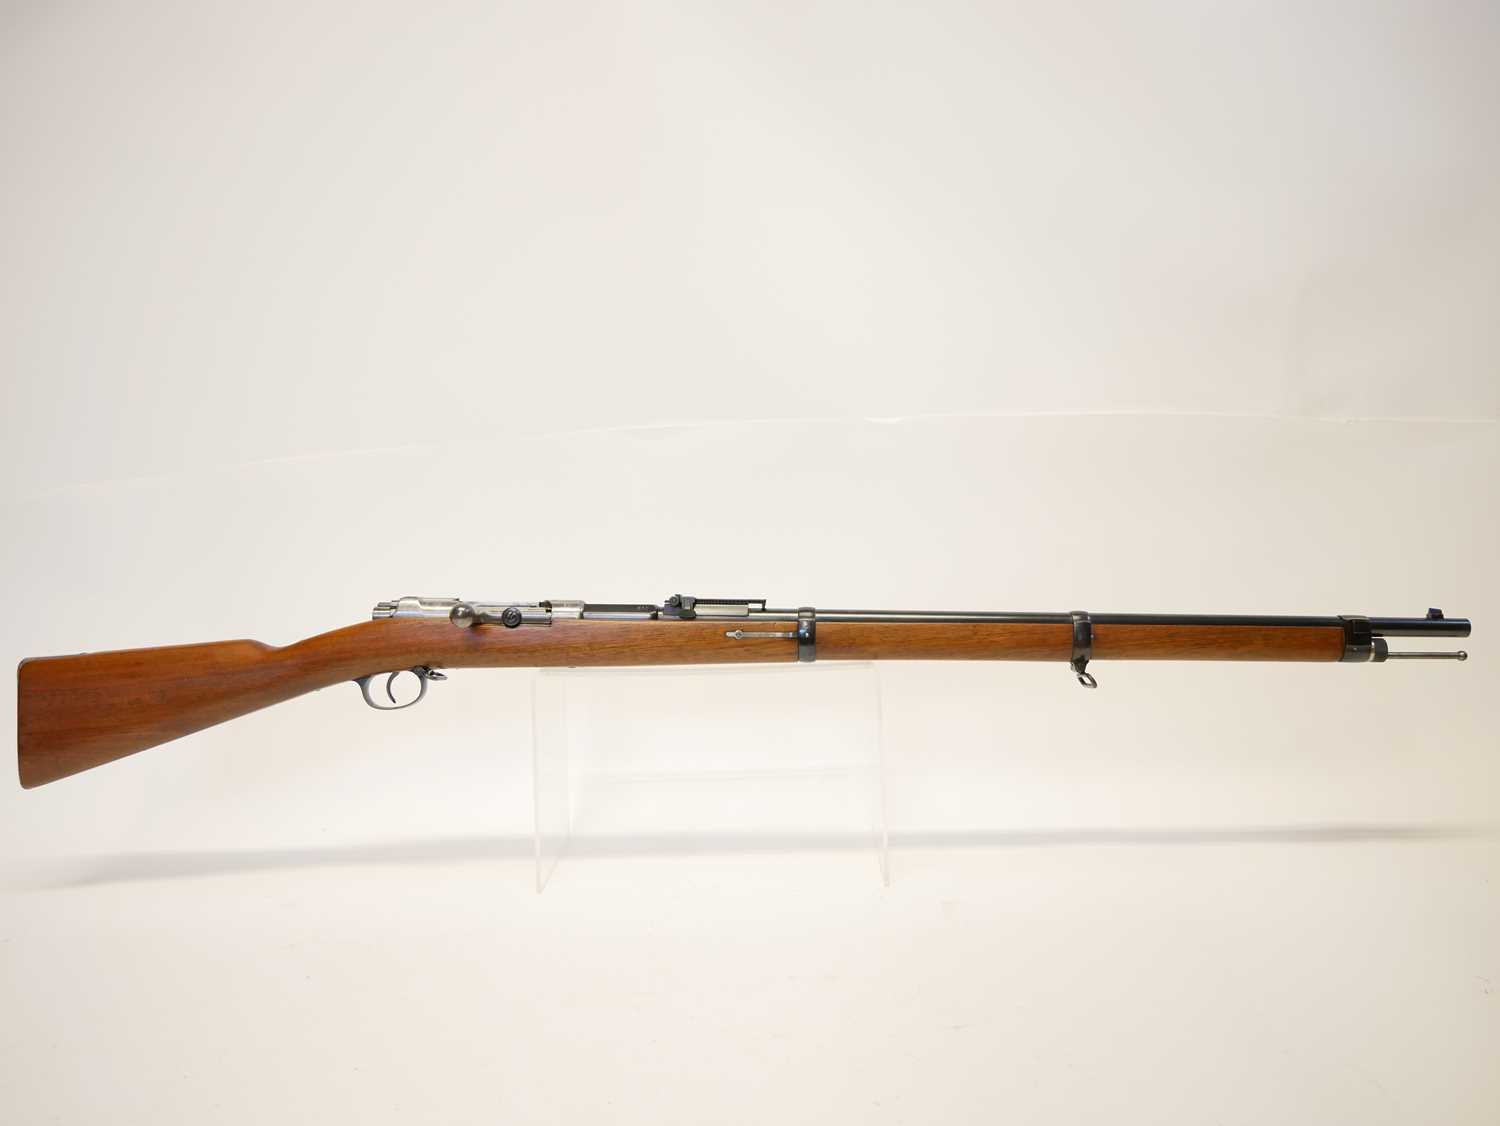 Mauser M1871/84 bolt action rifle 11 x 60R / .43 calibre, matching serial numbers 6701, 30.5" barrel - Image 2 of 20